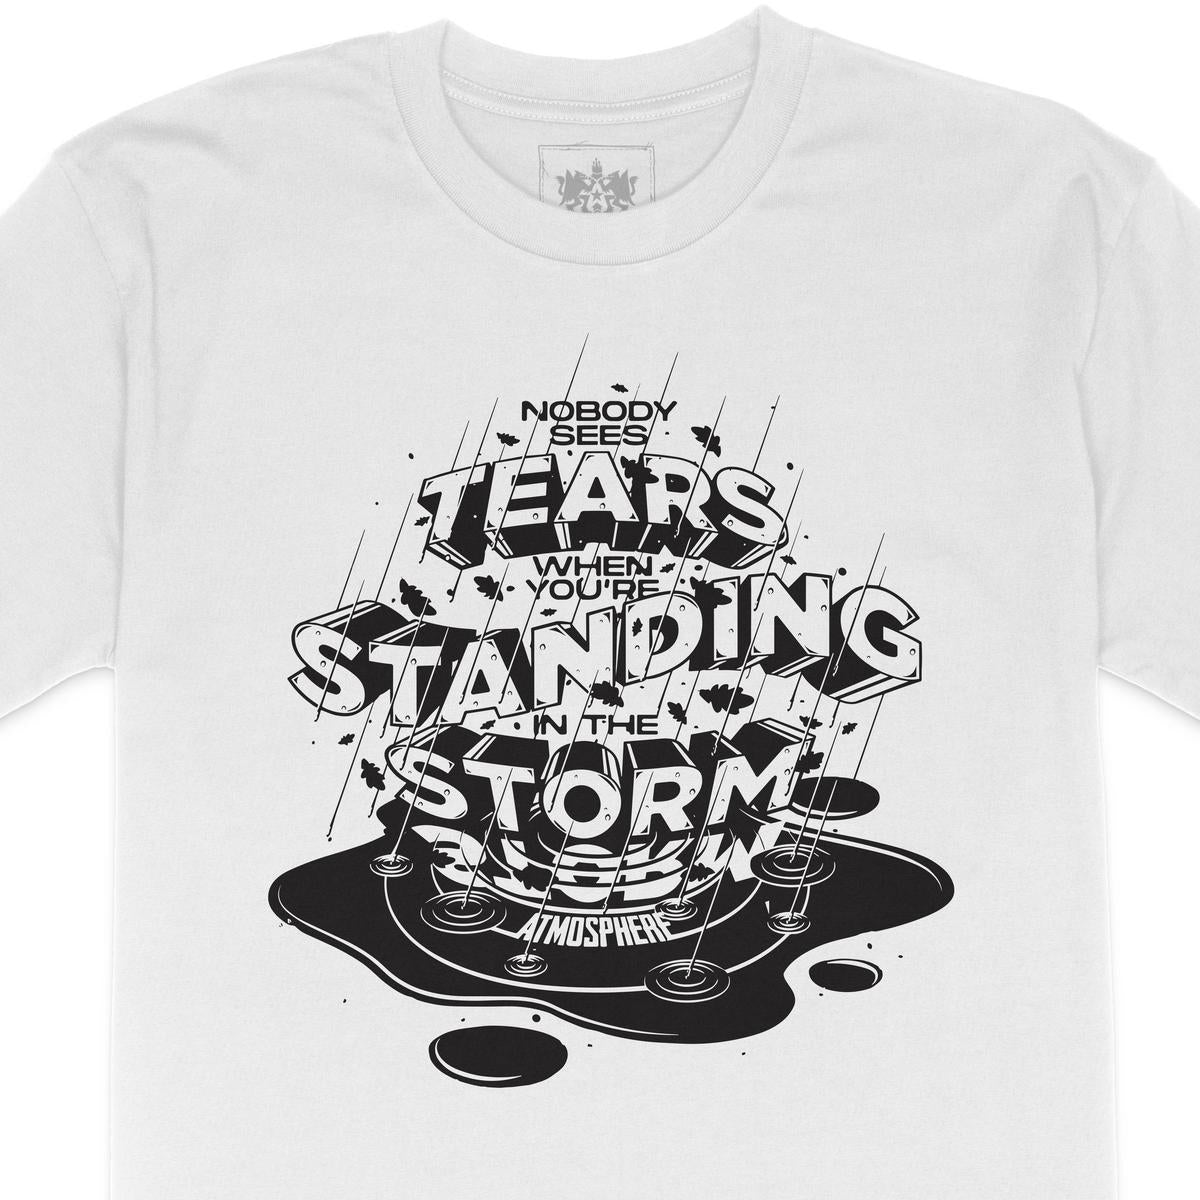 Atmosphere - Puddle of Tears / Storm Lyric Tee 2 (Limited Edition Shirt)